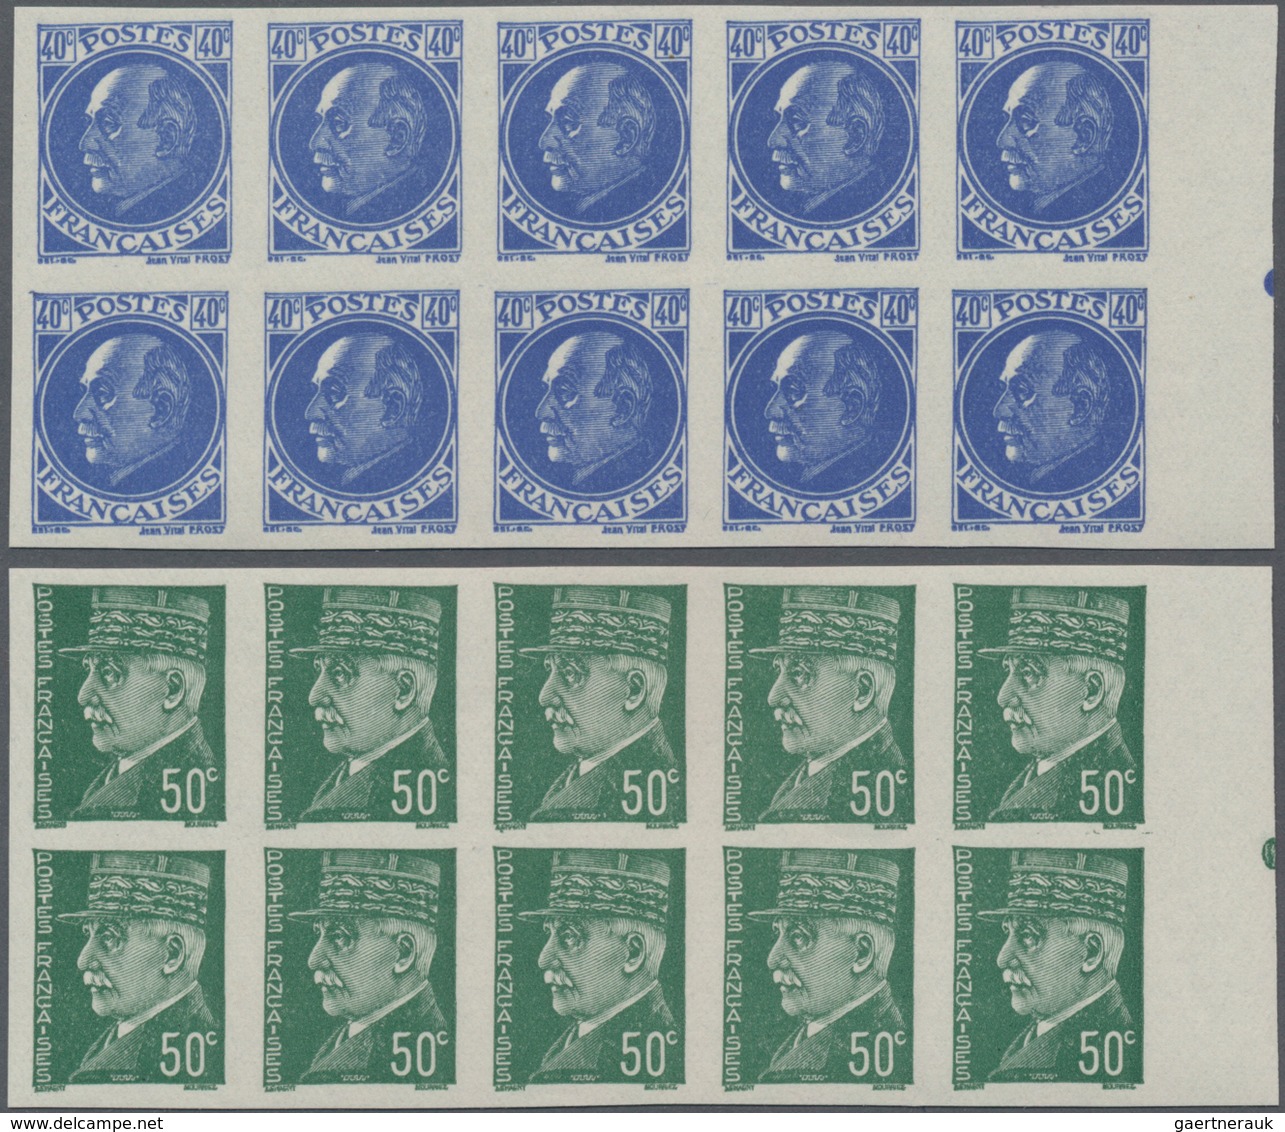 Frankreich: 1941/1942, definitive issue Marshall Petain complete set of 22 in IMPERFORATE blocks of